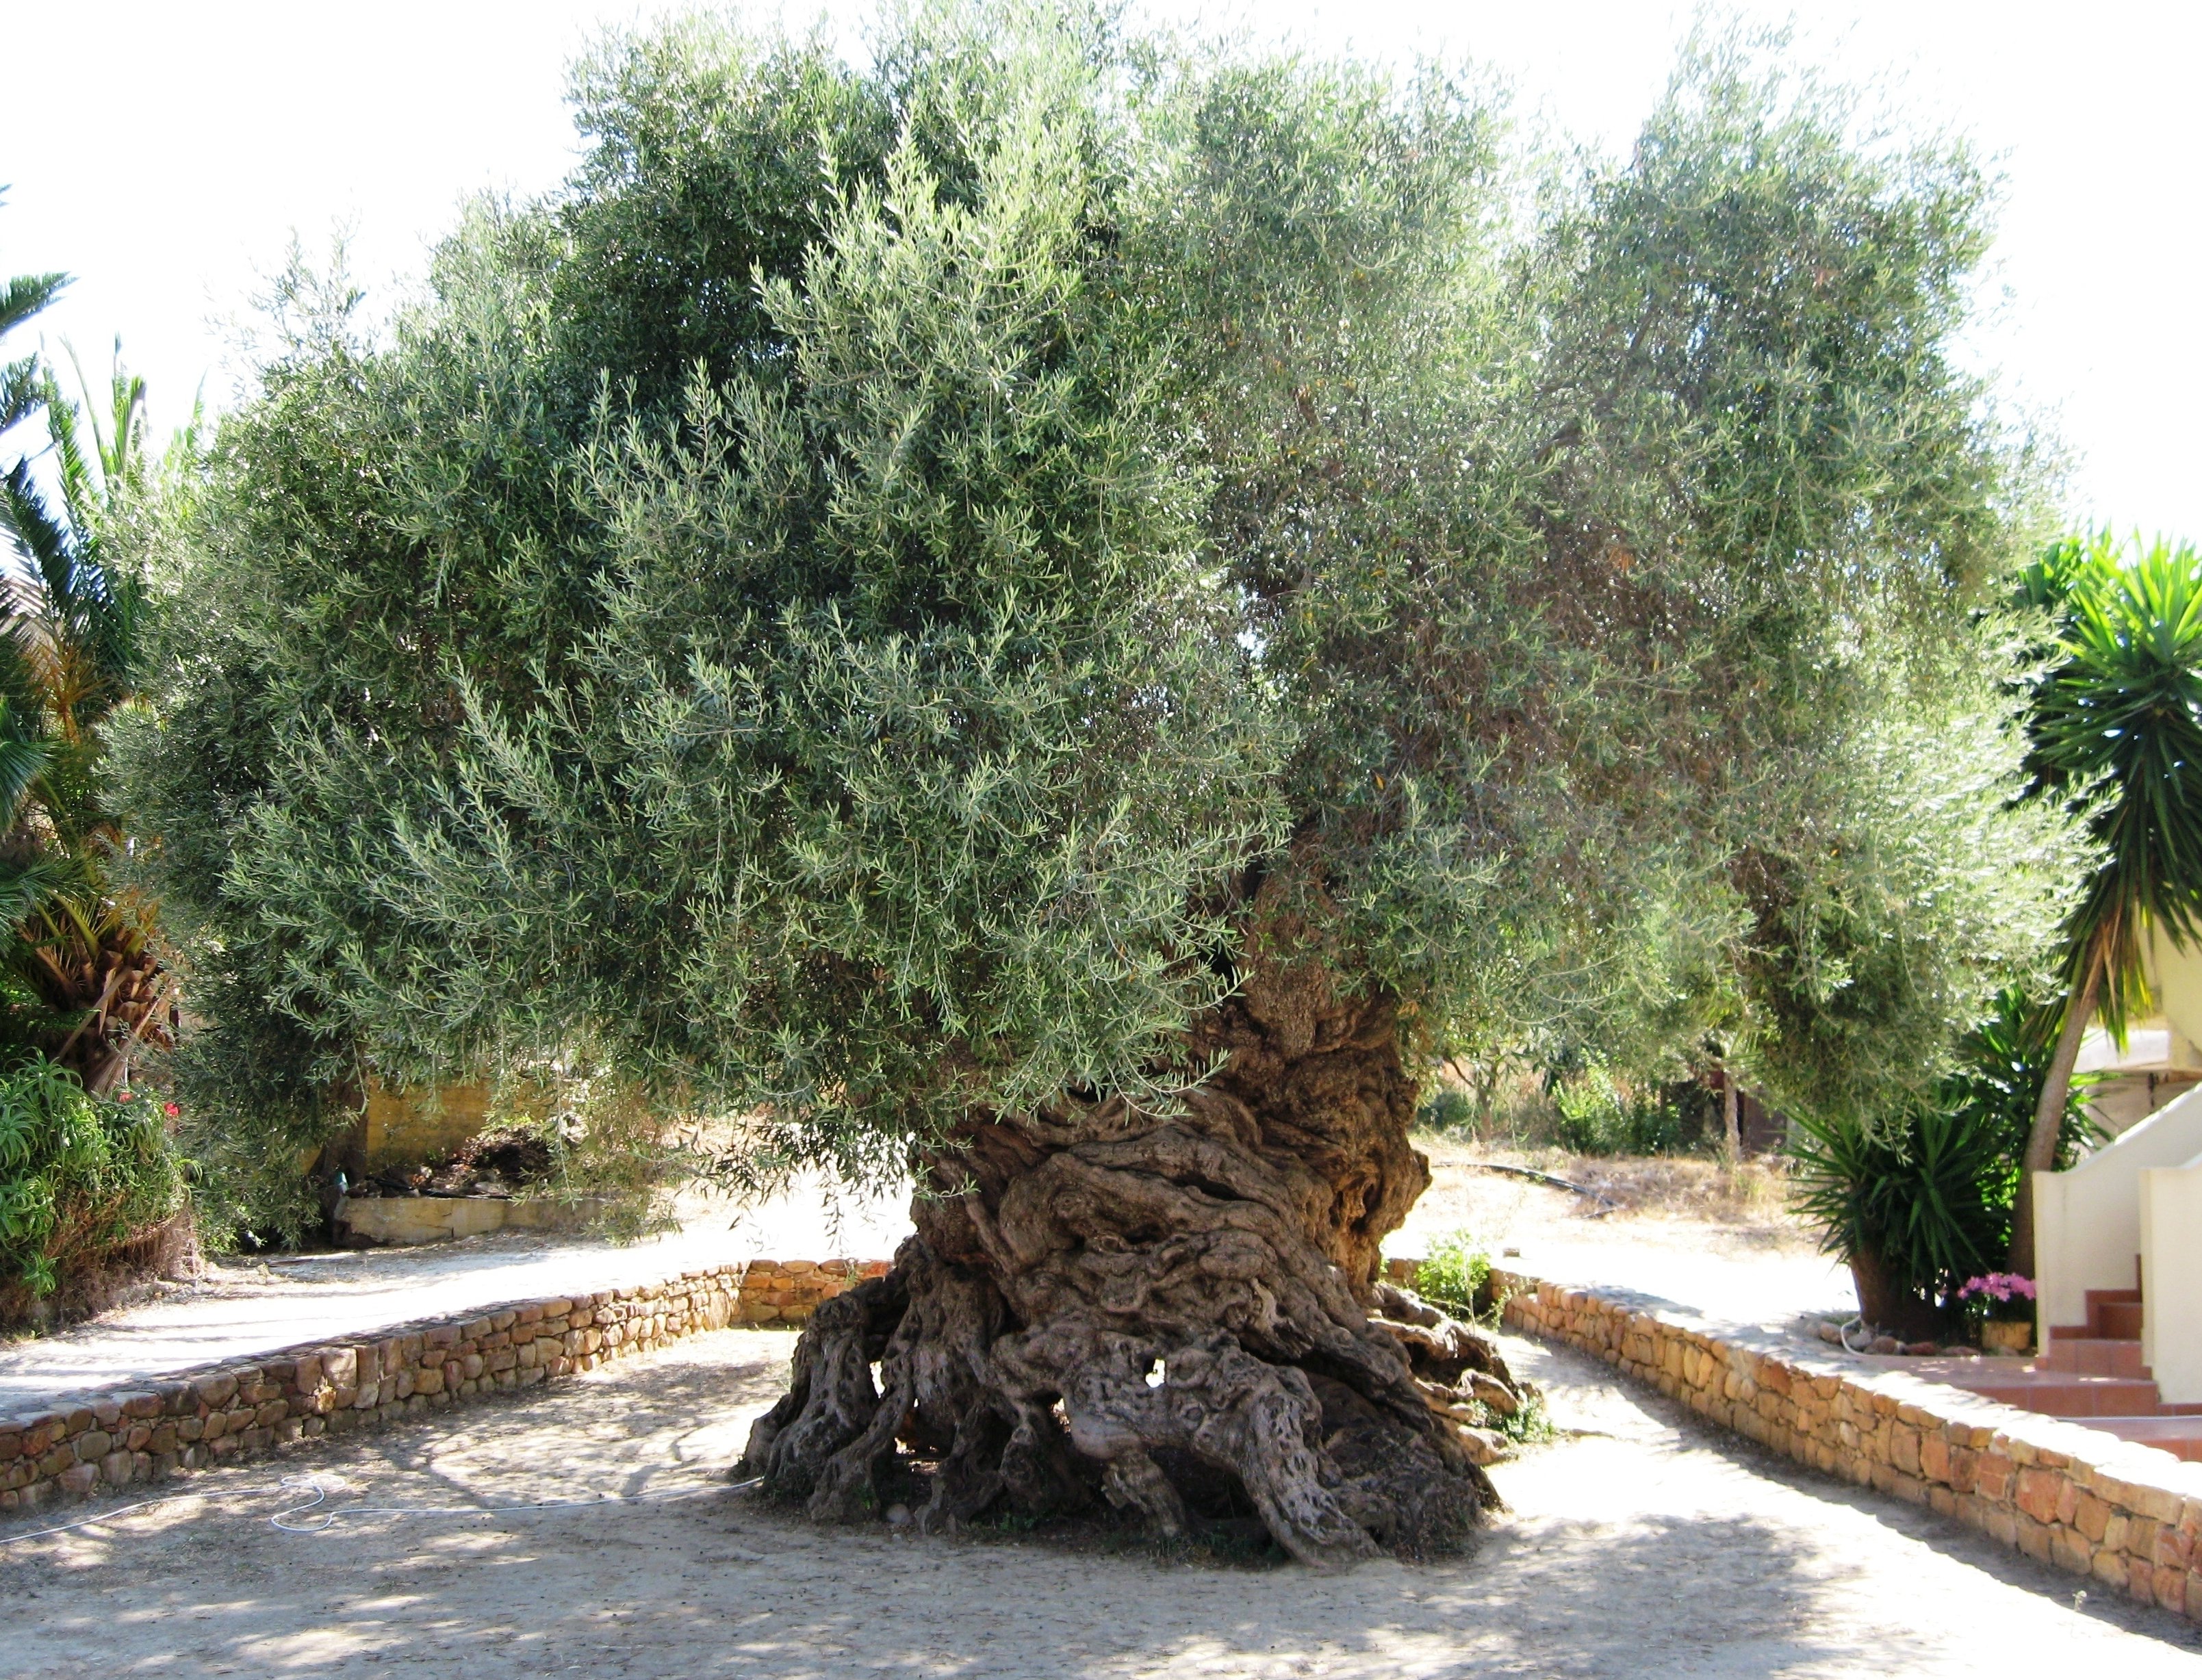 2000 year old olive tree